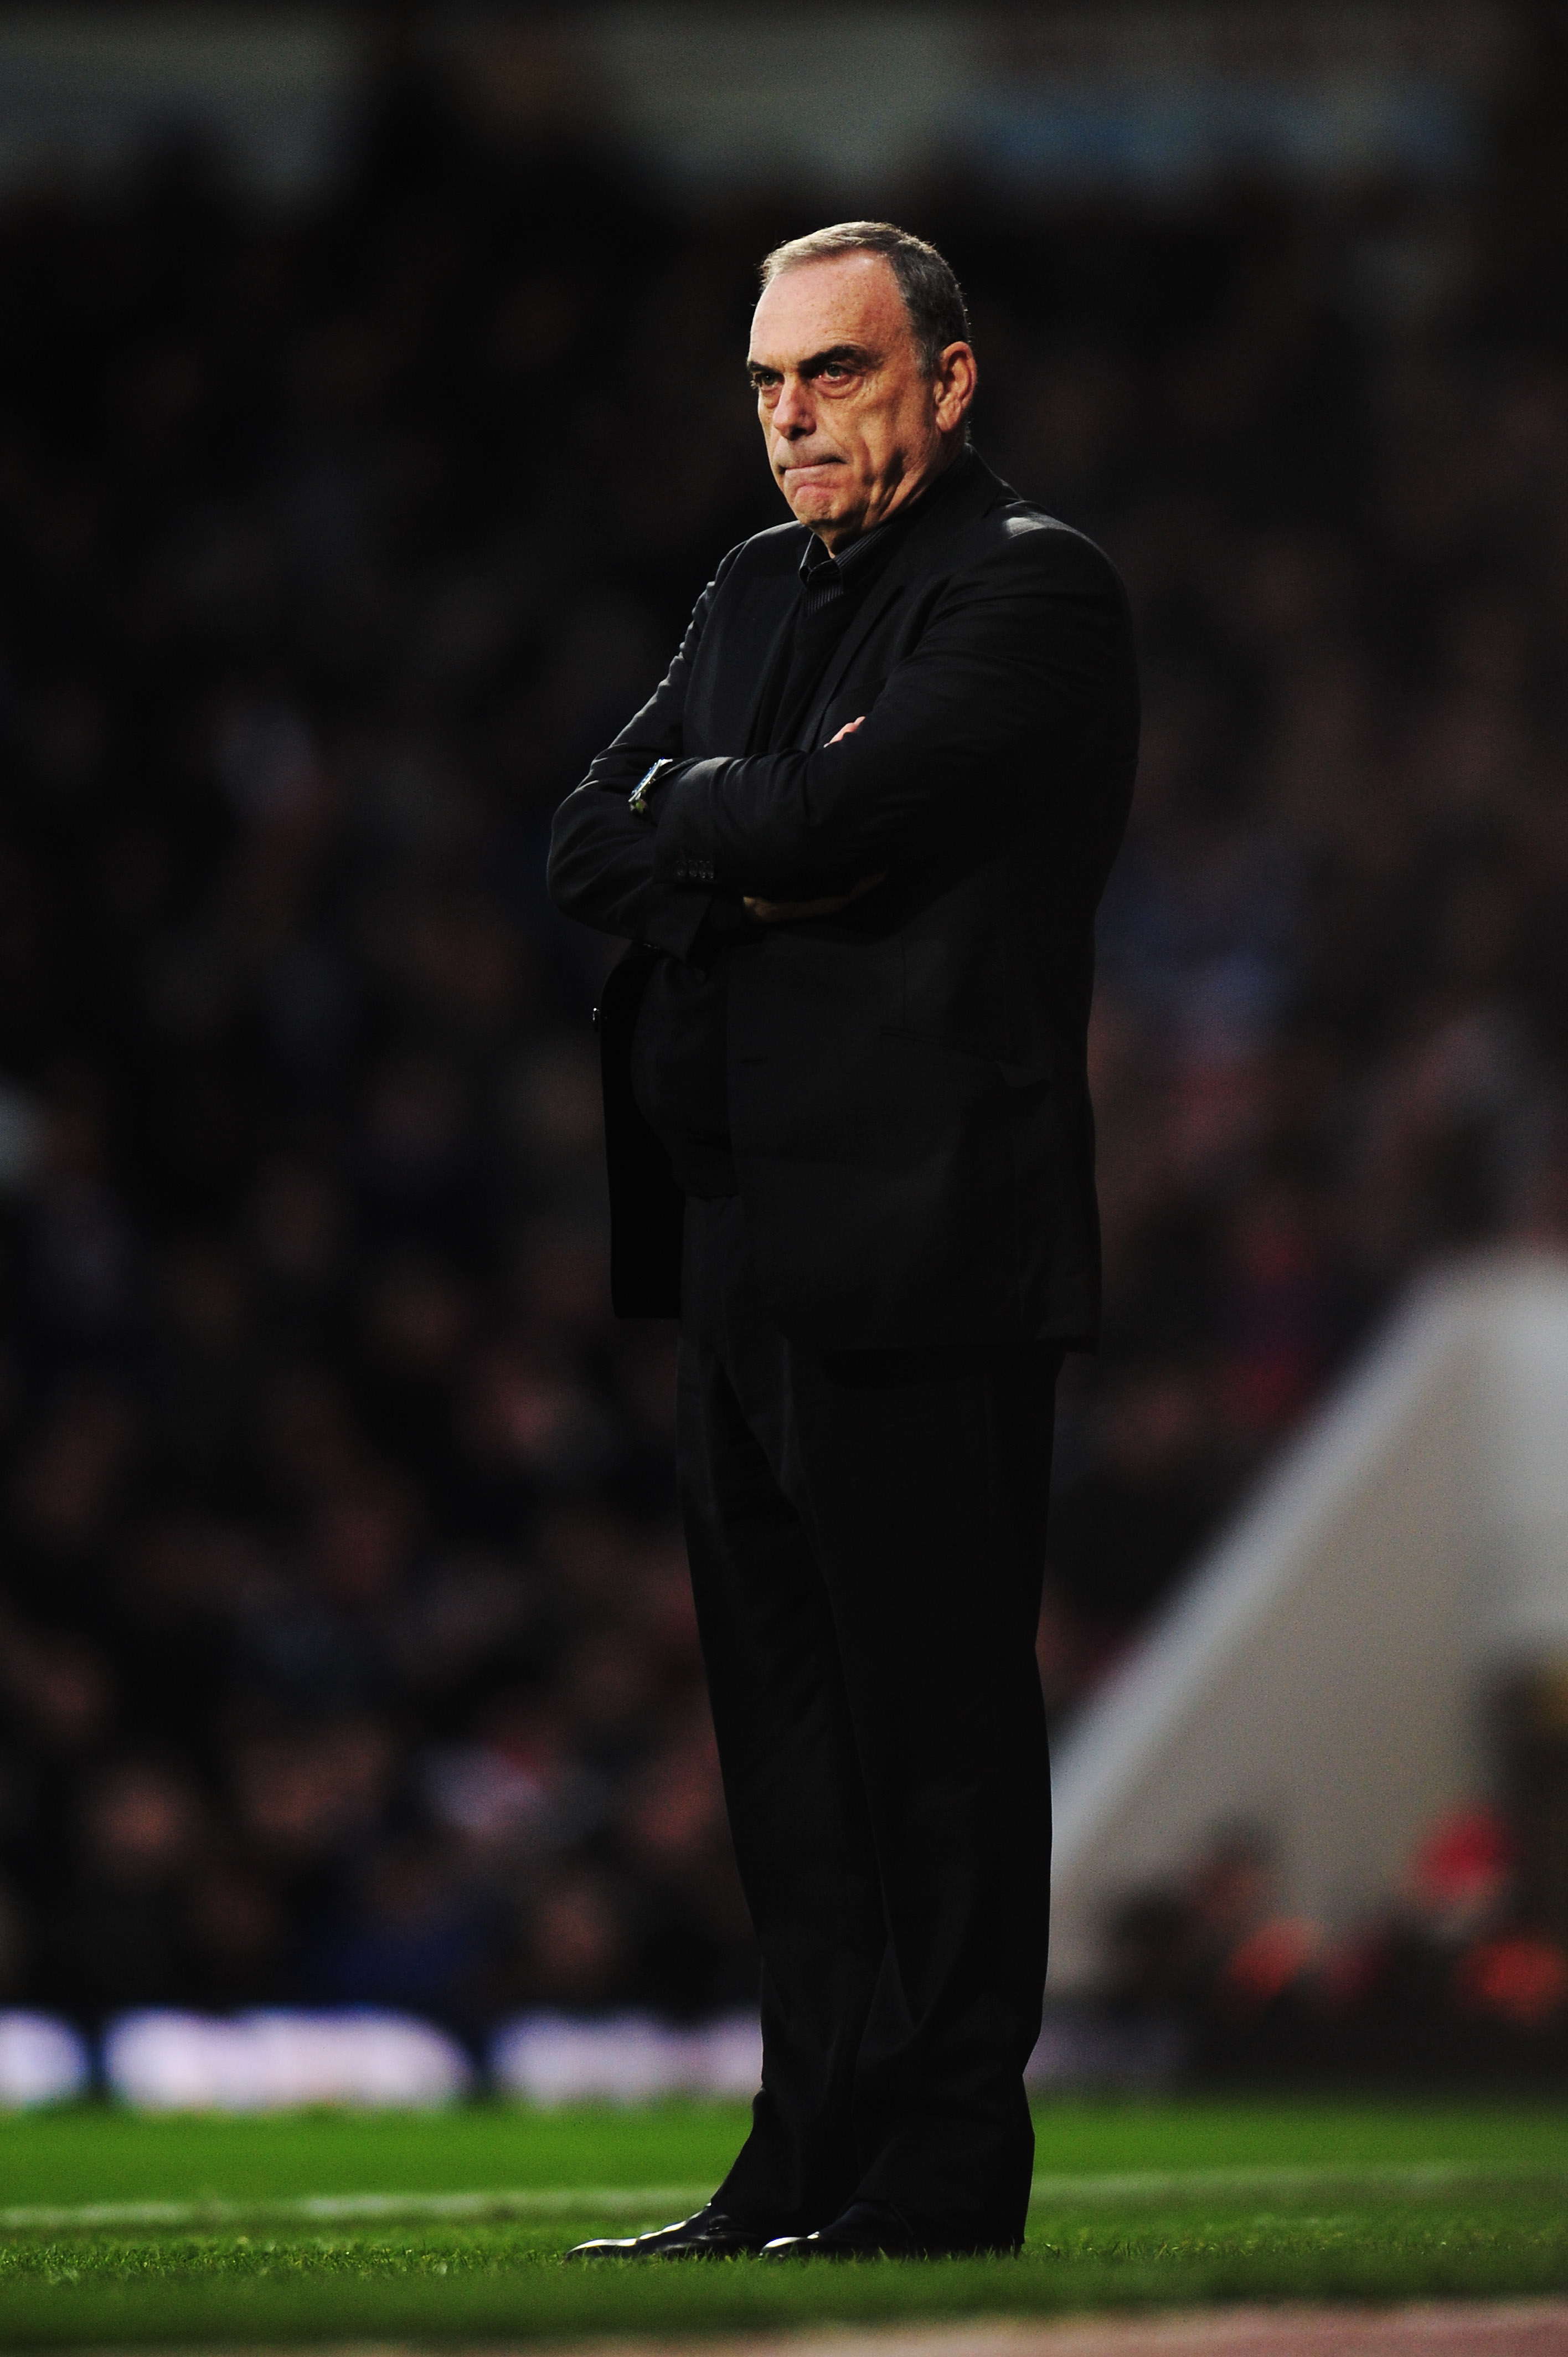 LONDON, UNITED KINGDOM - DECEMBER 11:  Avram Grant the West Ham United manager watches from the touchline during the Barclays Premier League match between West Ham United and Manchester City at Upton Park on December 11, 2010 in London, England.  (Photo b